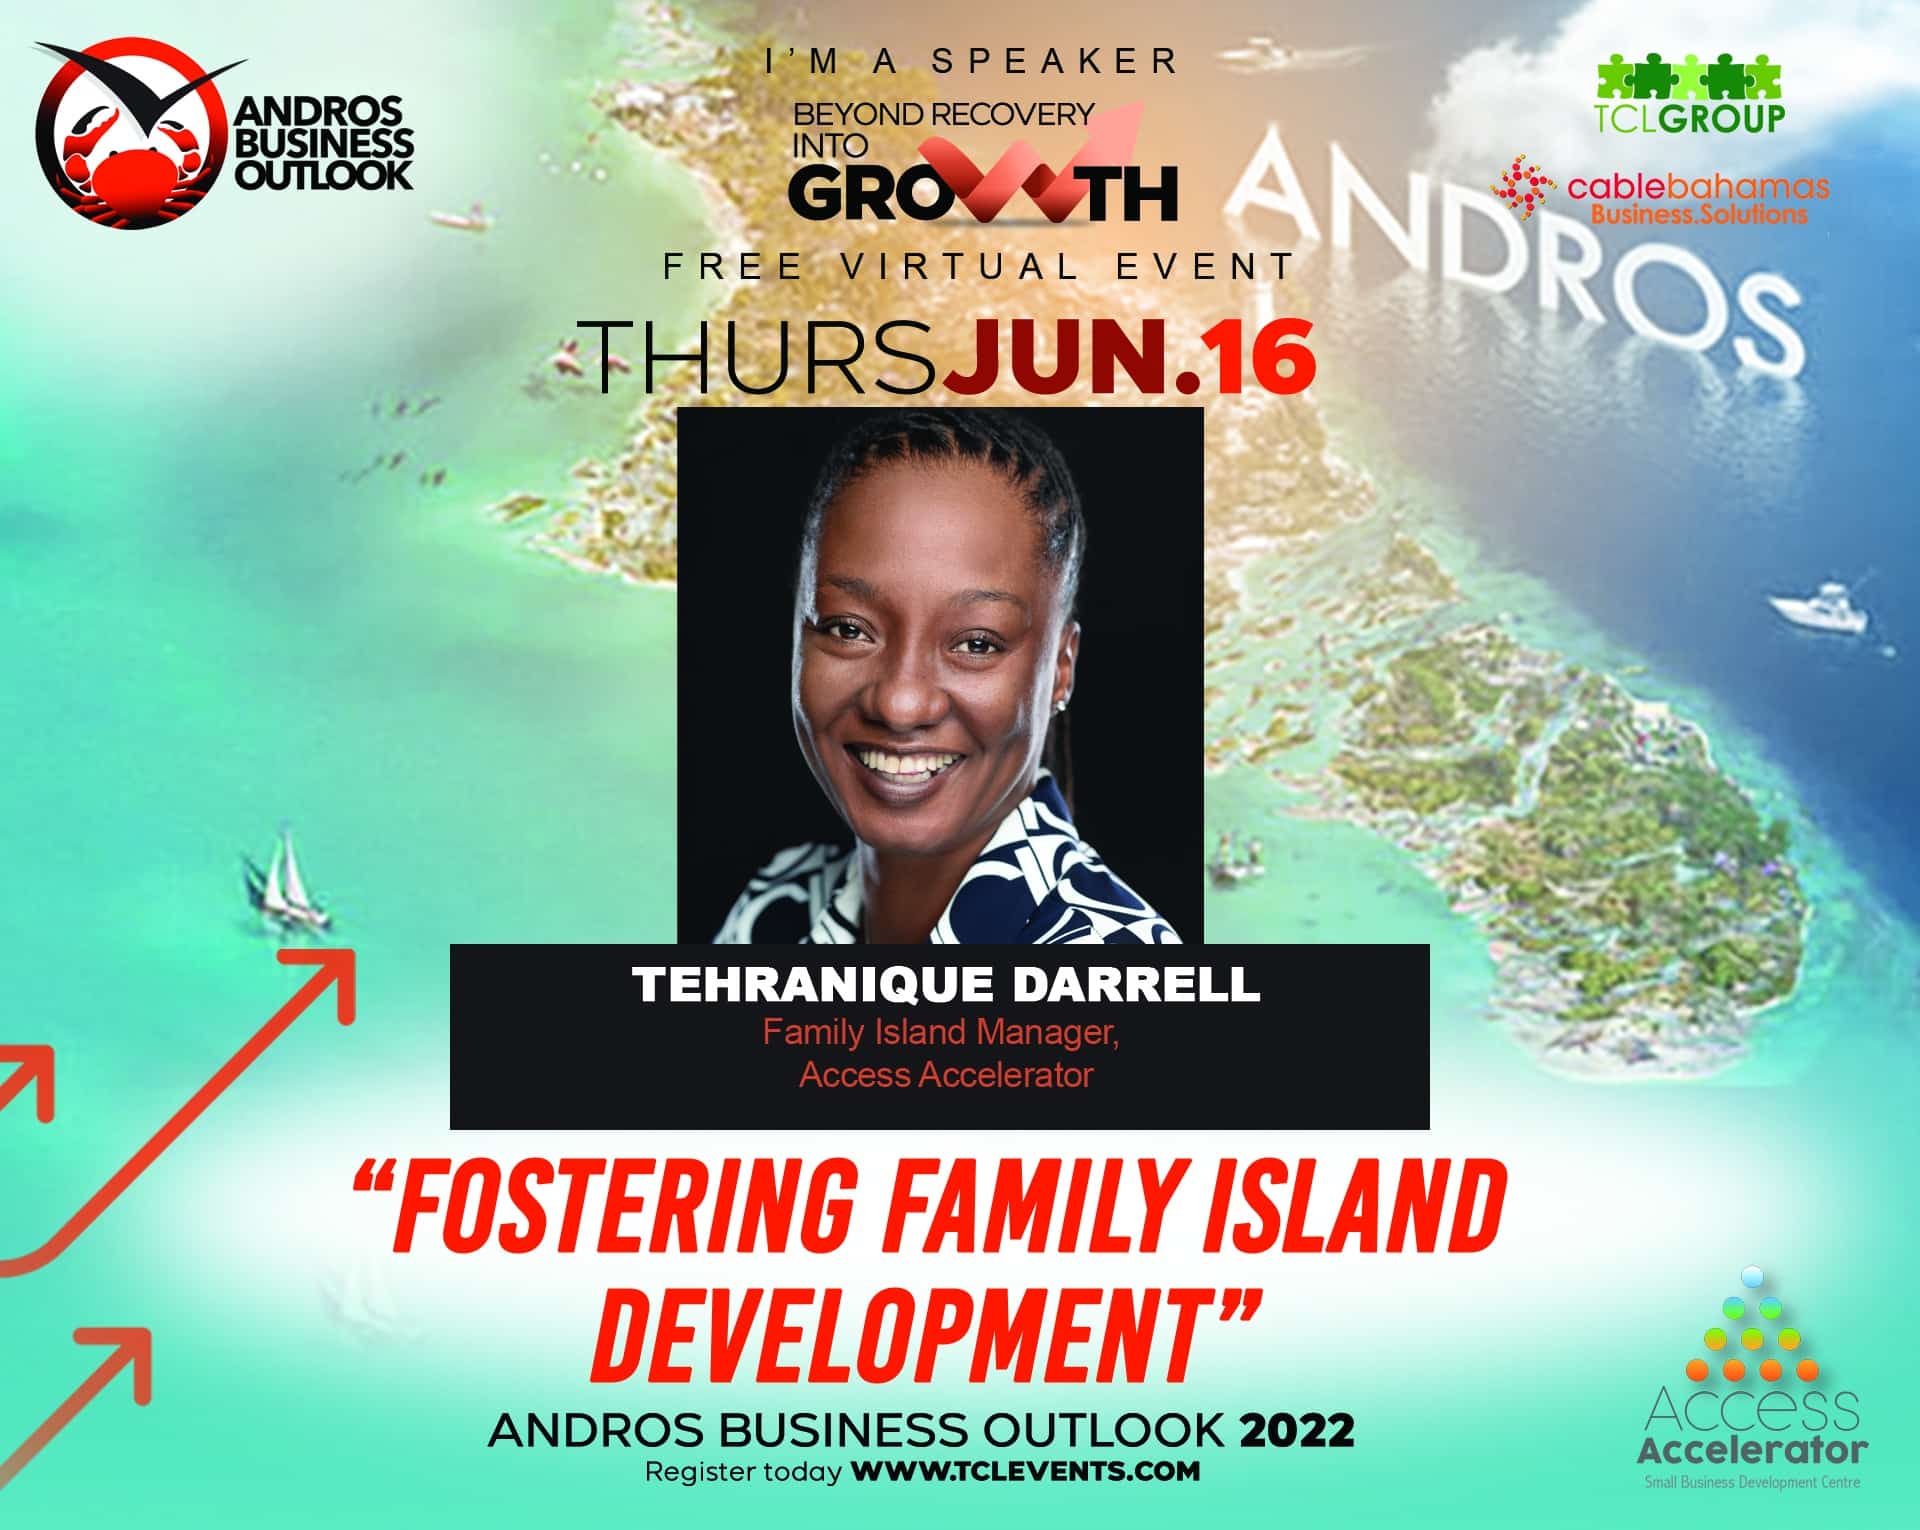 Andros Business Outlook 2022 graphic promotional flier